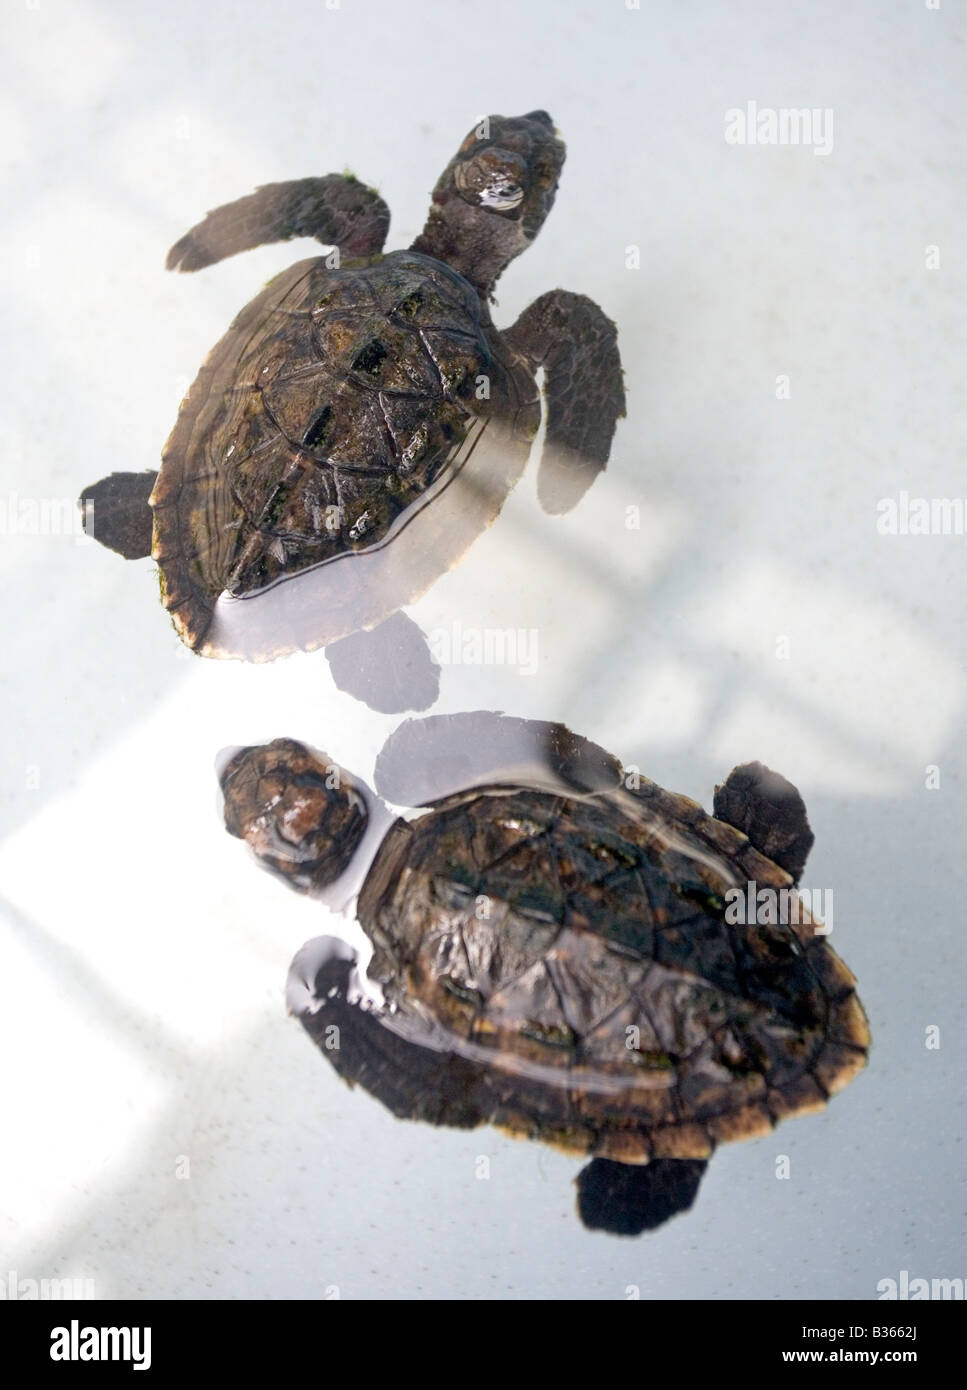 3 month old baby Hawksbill turtles at the Oldhegg Turtle Sanctuary in Bequia West Indies Stock Photo